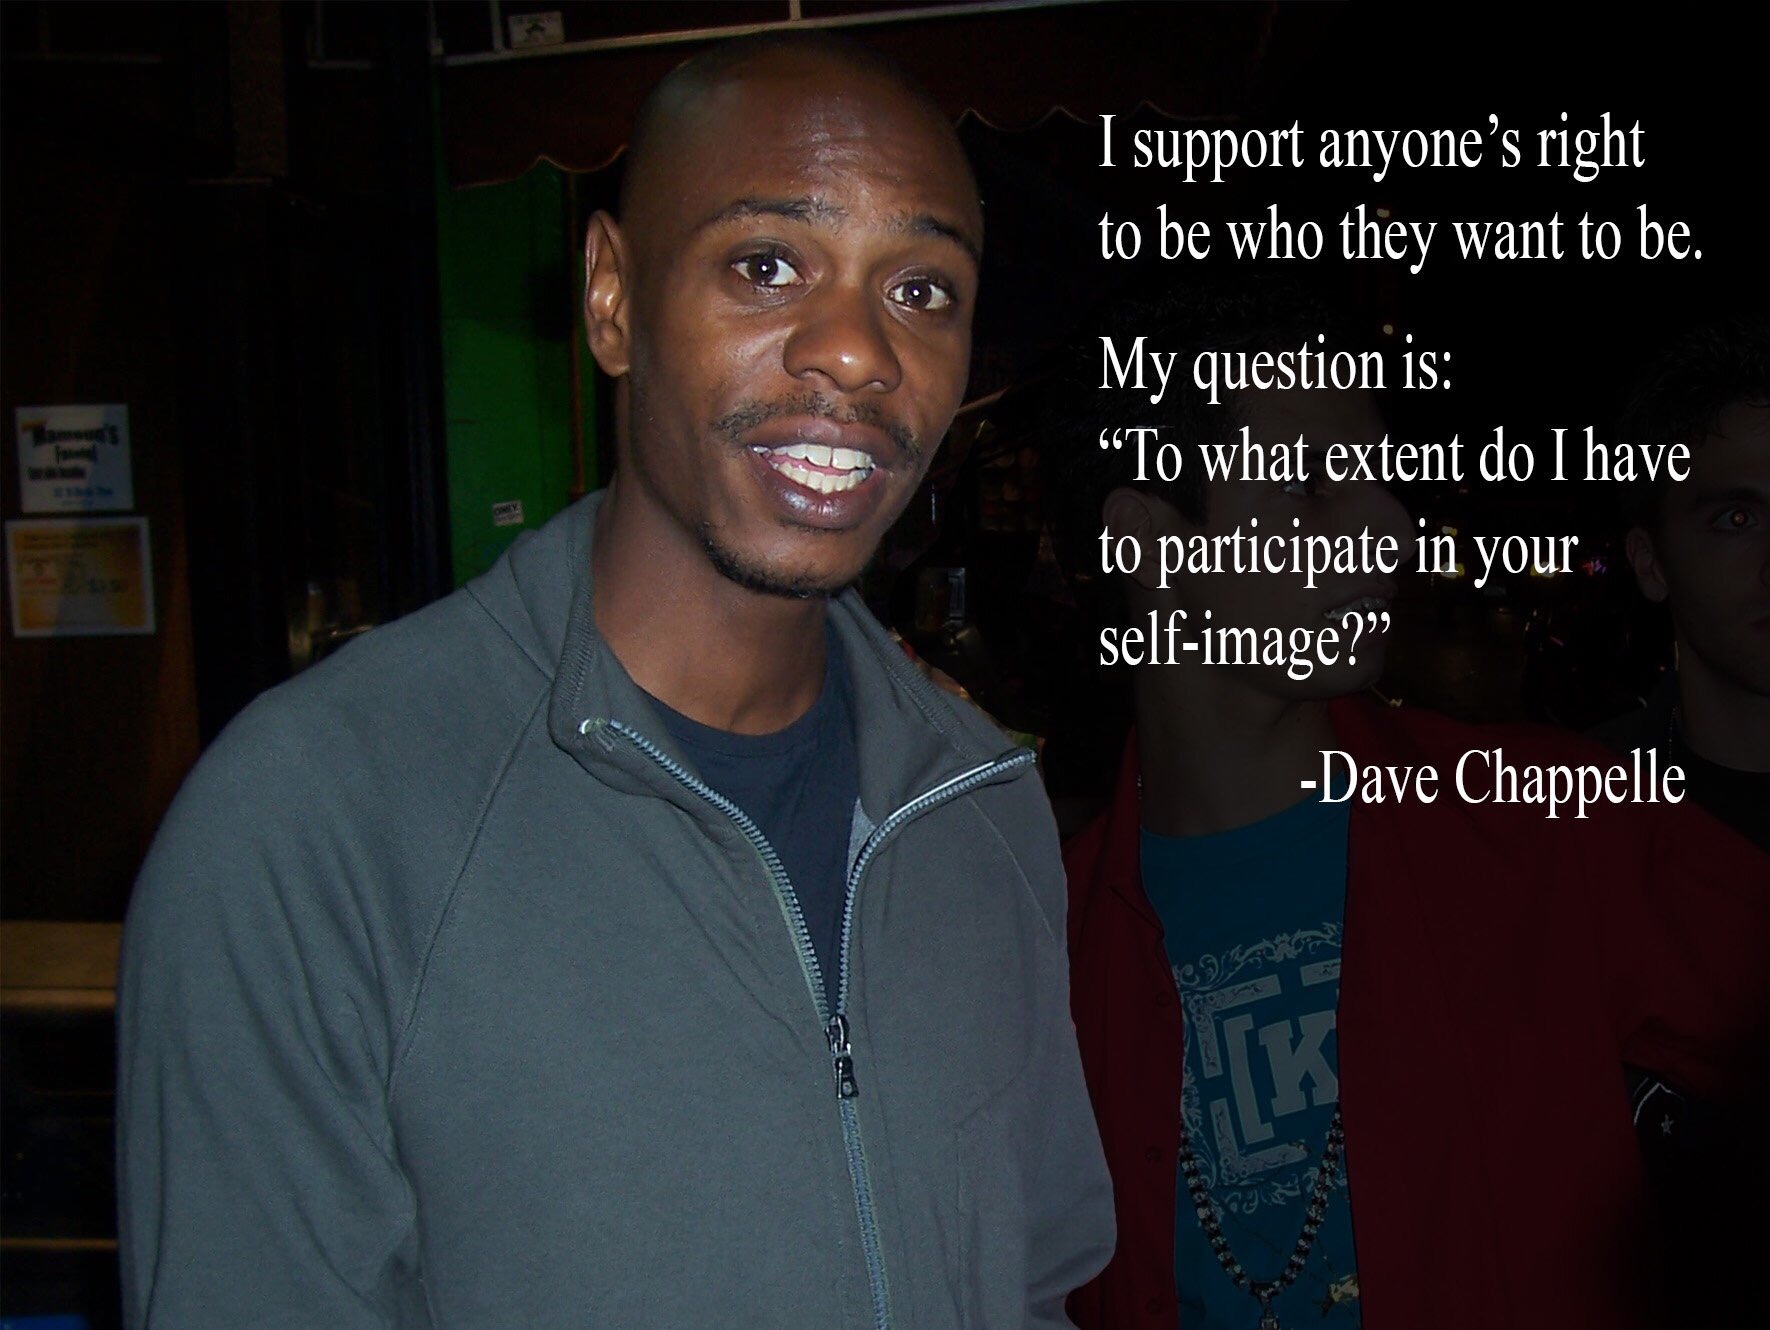 dave chappelle chip - mes I support anyone's right to be who they want to be. My question is "To what extent do I have to participate in your selfimage? Dave Chappelle verer